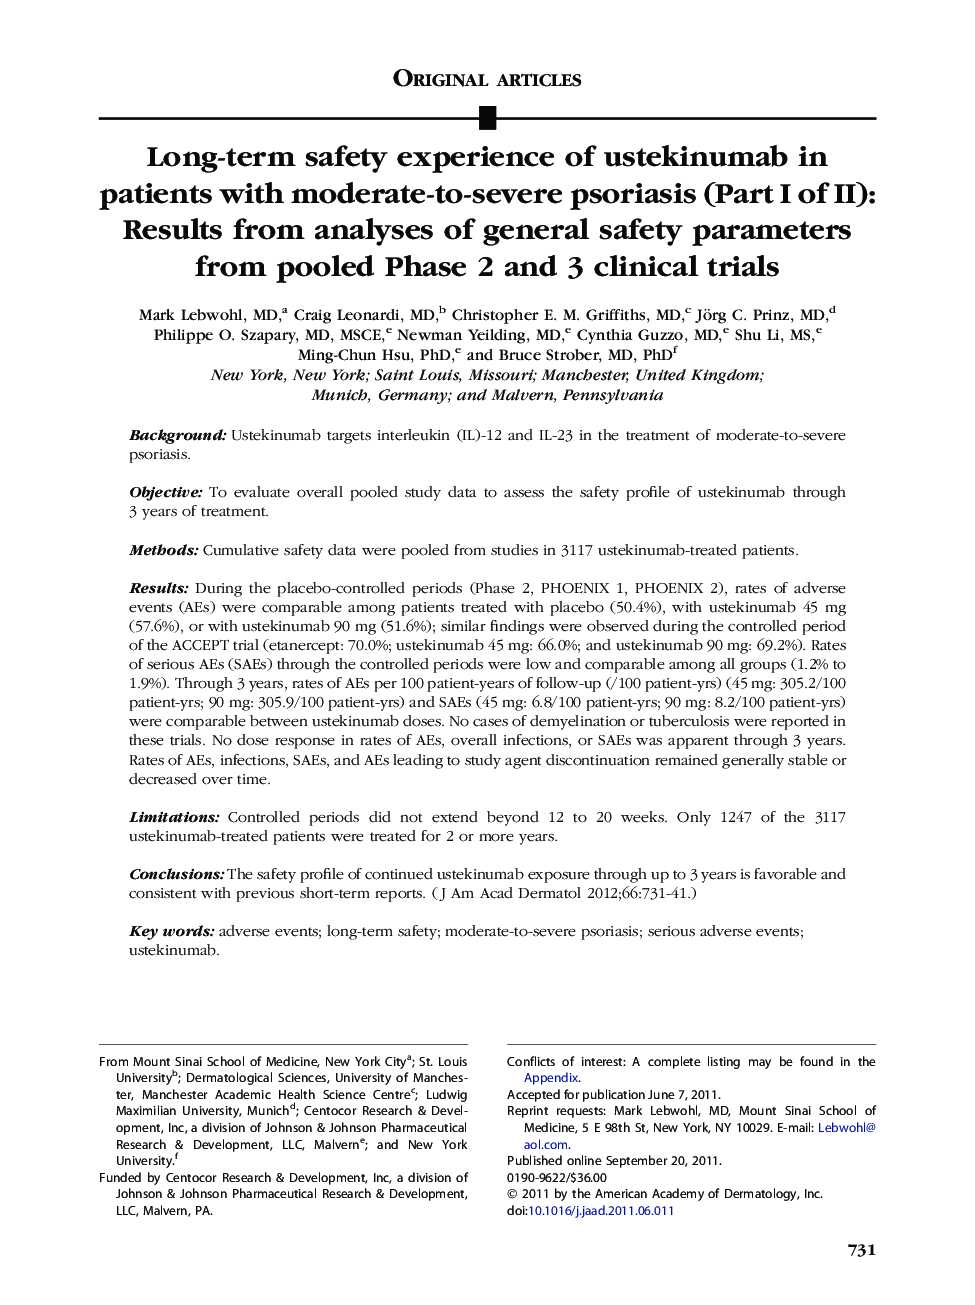 Long-term safety experience of ustekinumab in patients with moderate-to-severe psoriasis (Part I of II): Results from analyses of general safety parameters from pooled Phase 2 and 3 clinical trials 